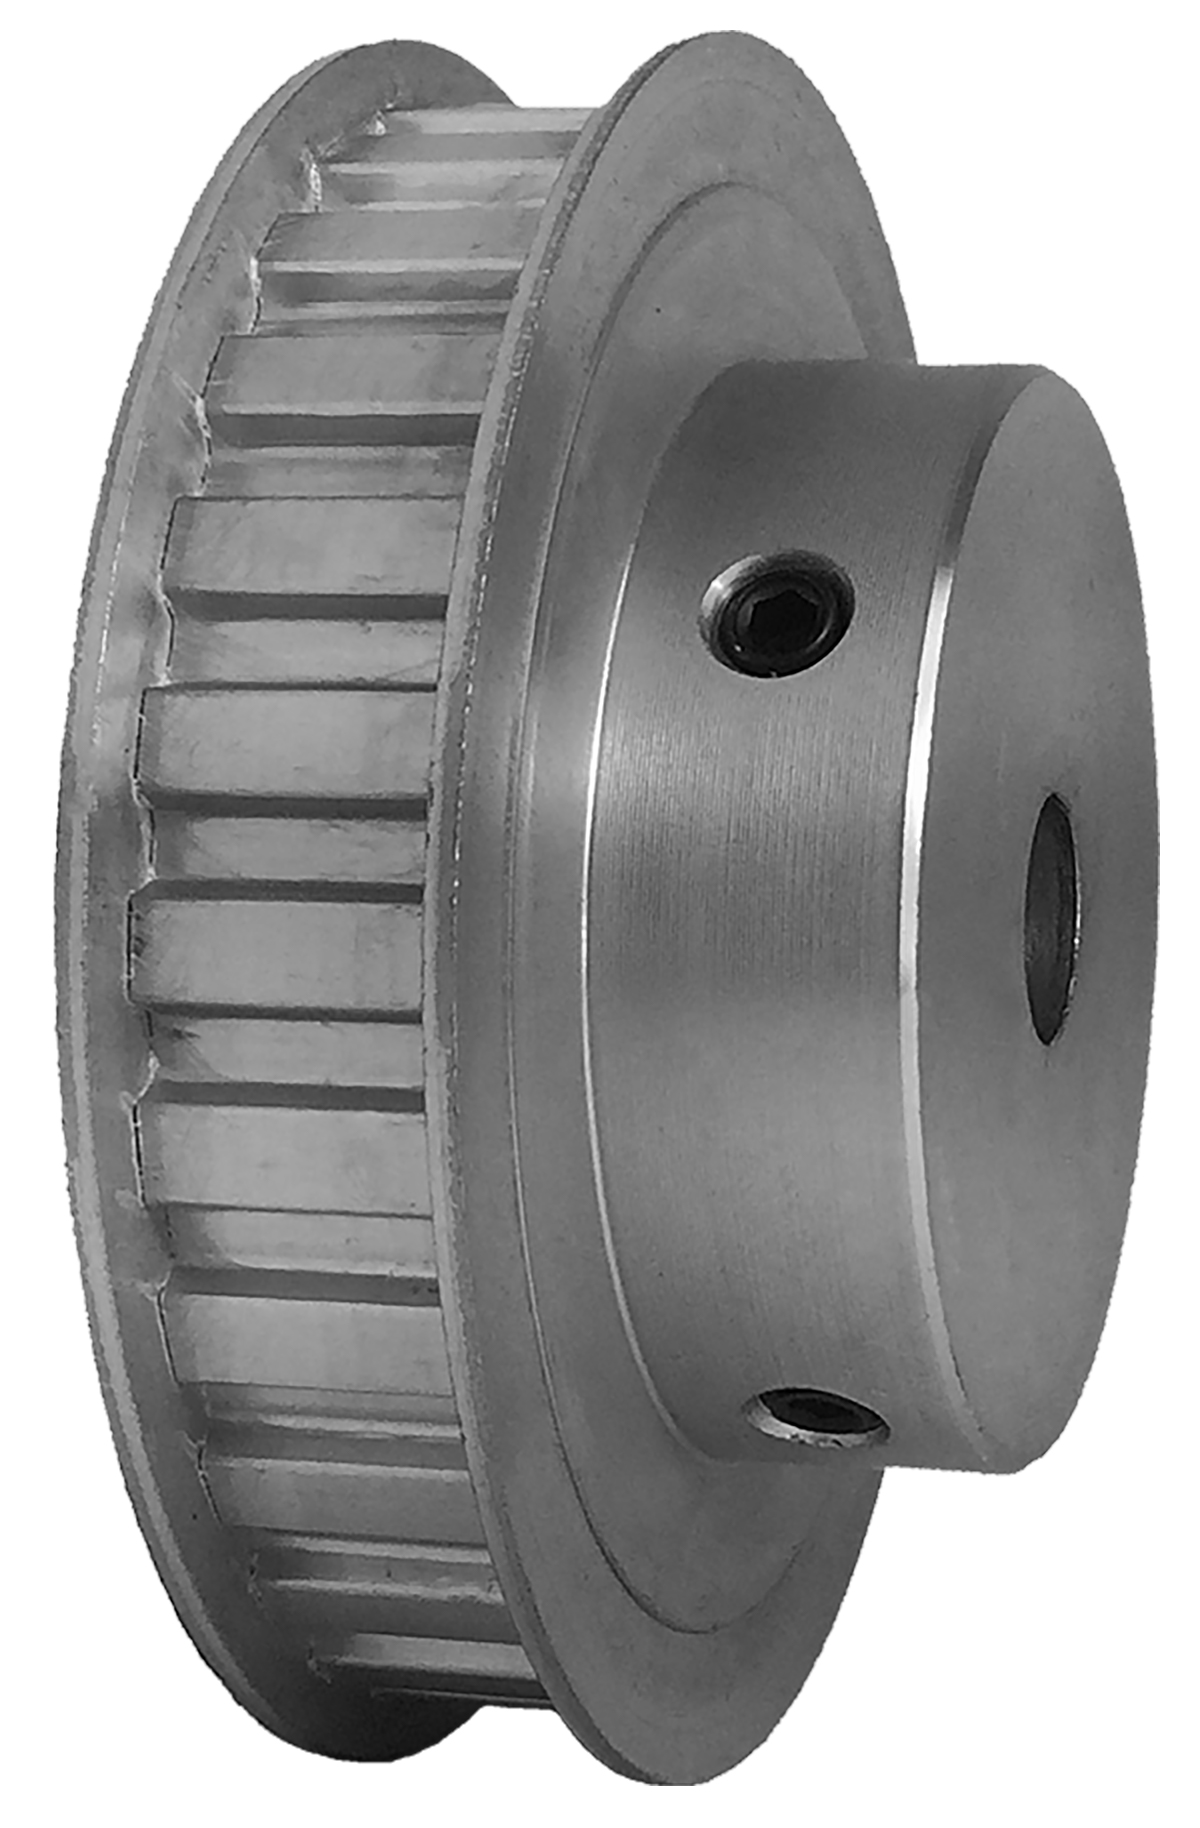 28L050-6FA6 - Aluminum Imperial Pitch Pulleys